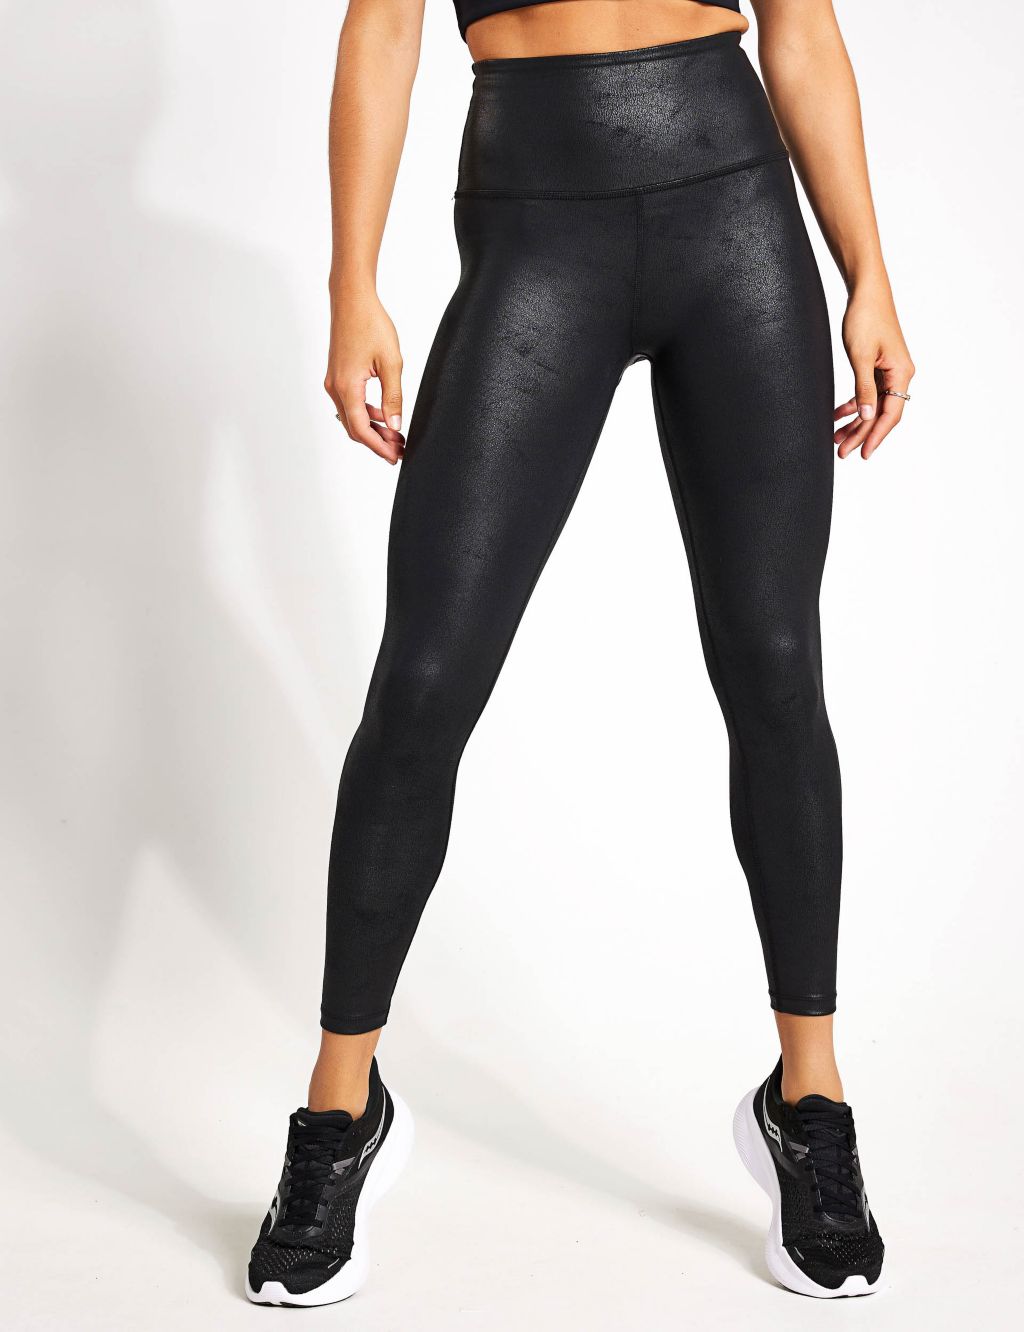 Marks & Spencer's 'stylish' £25 yoga leggings that are 'super comfortable  and flattering' - Birmingham Live